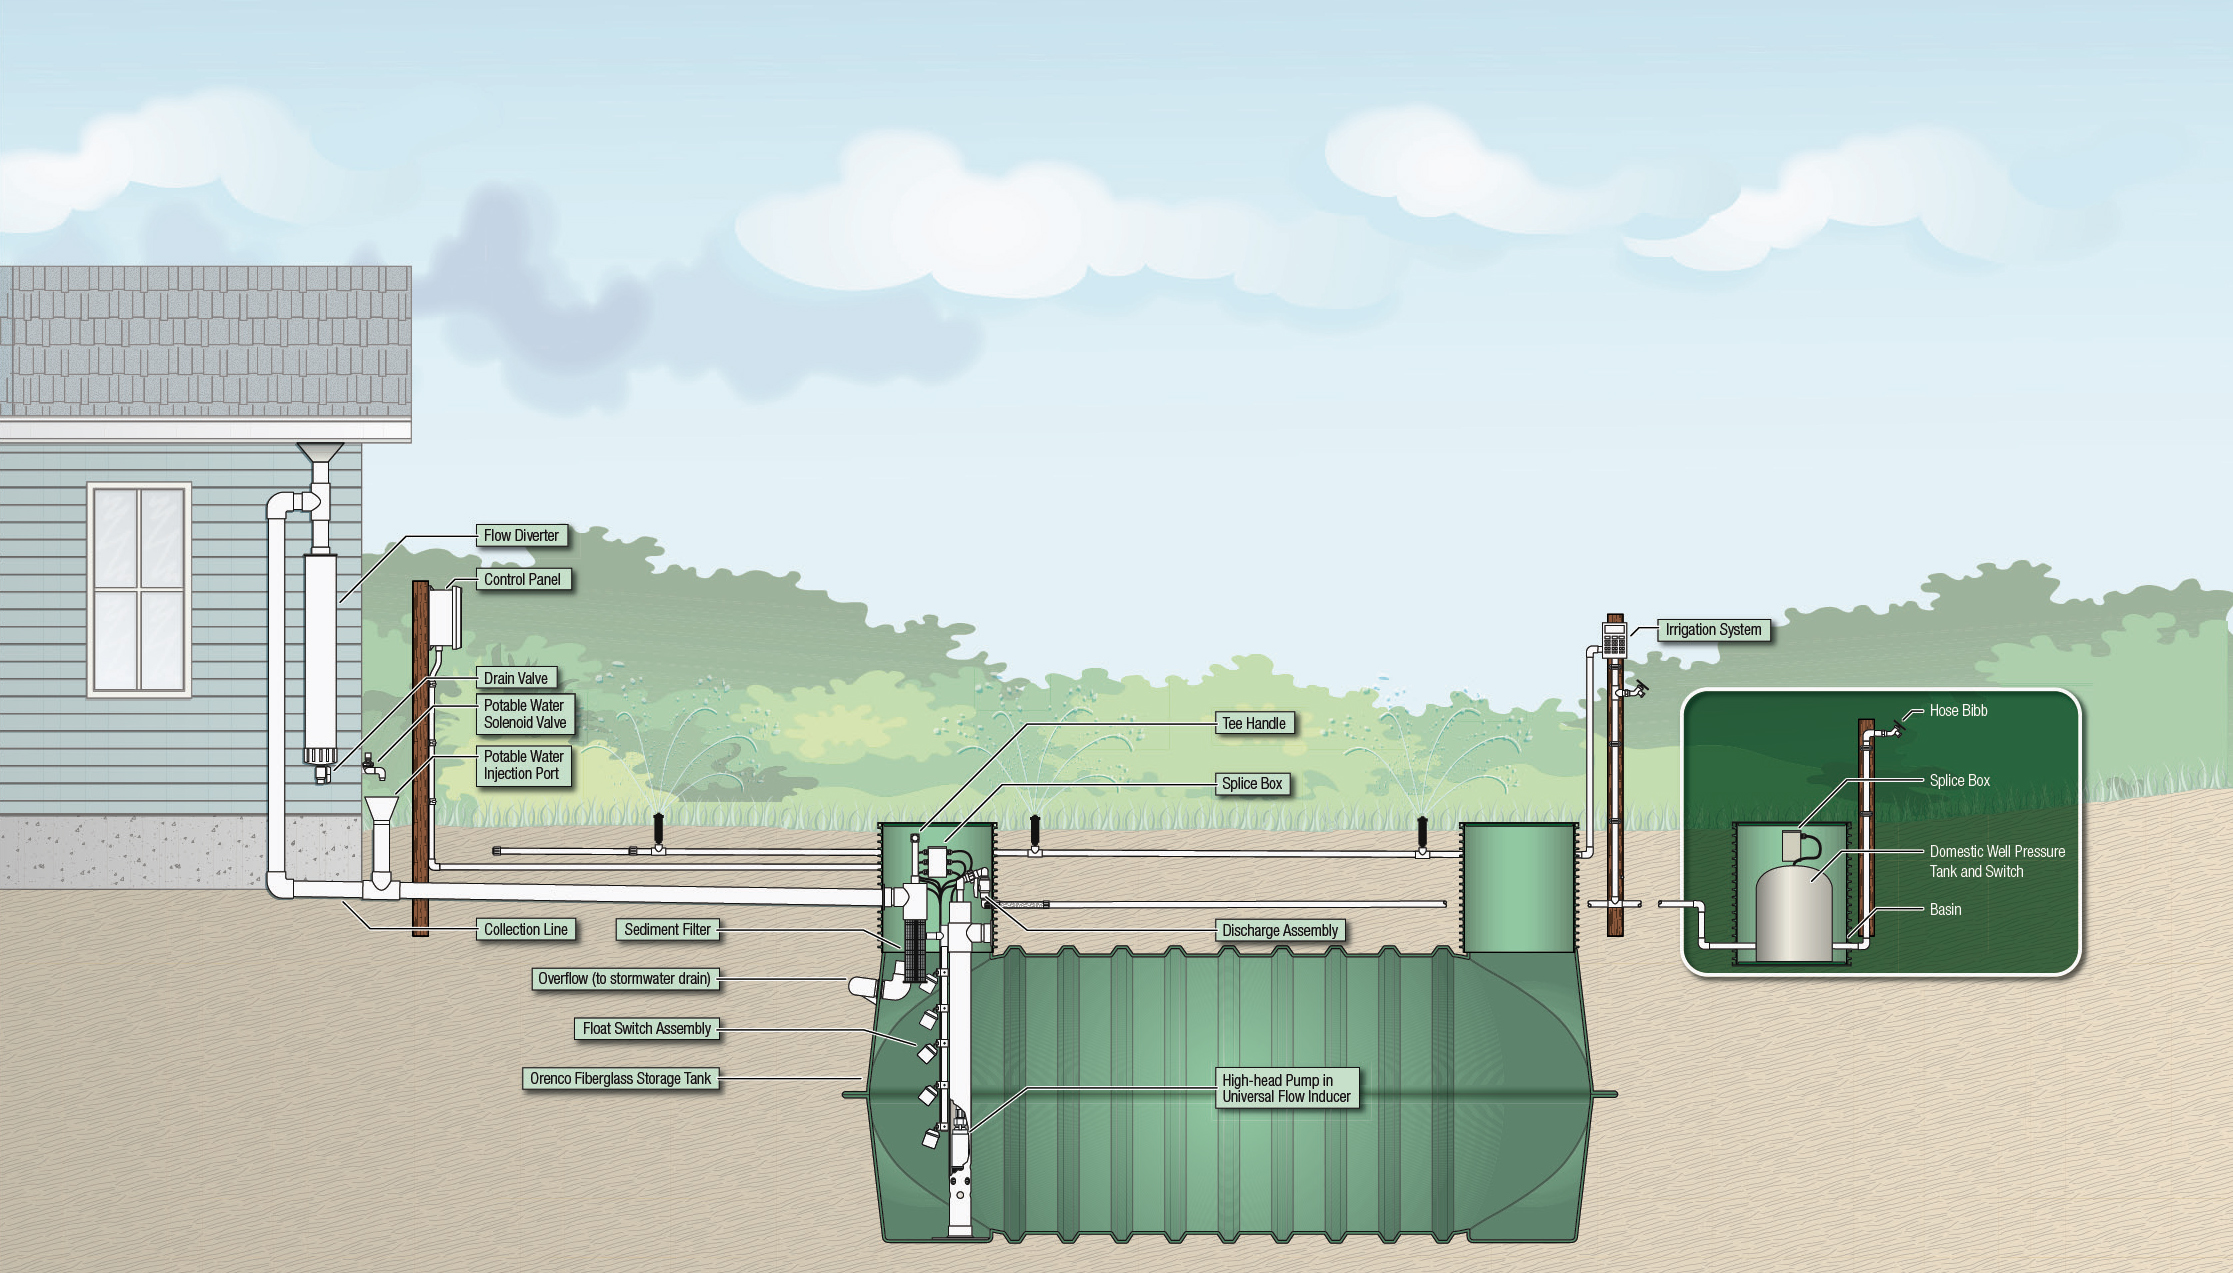 Schematic of greywater system showing filtration and storage leading to landscape irrigation - illus